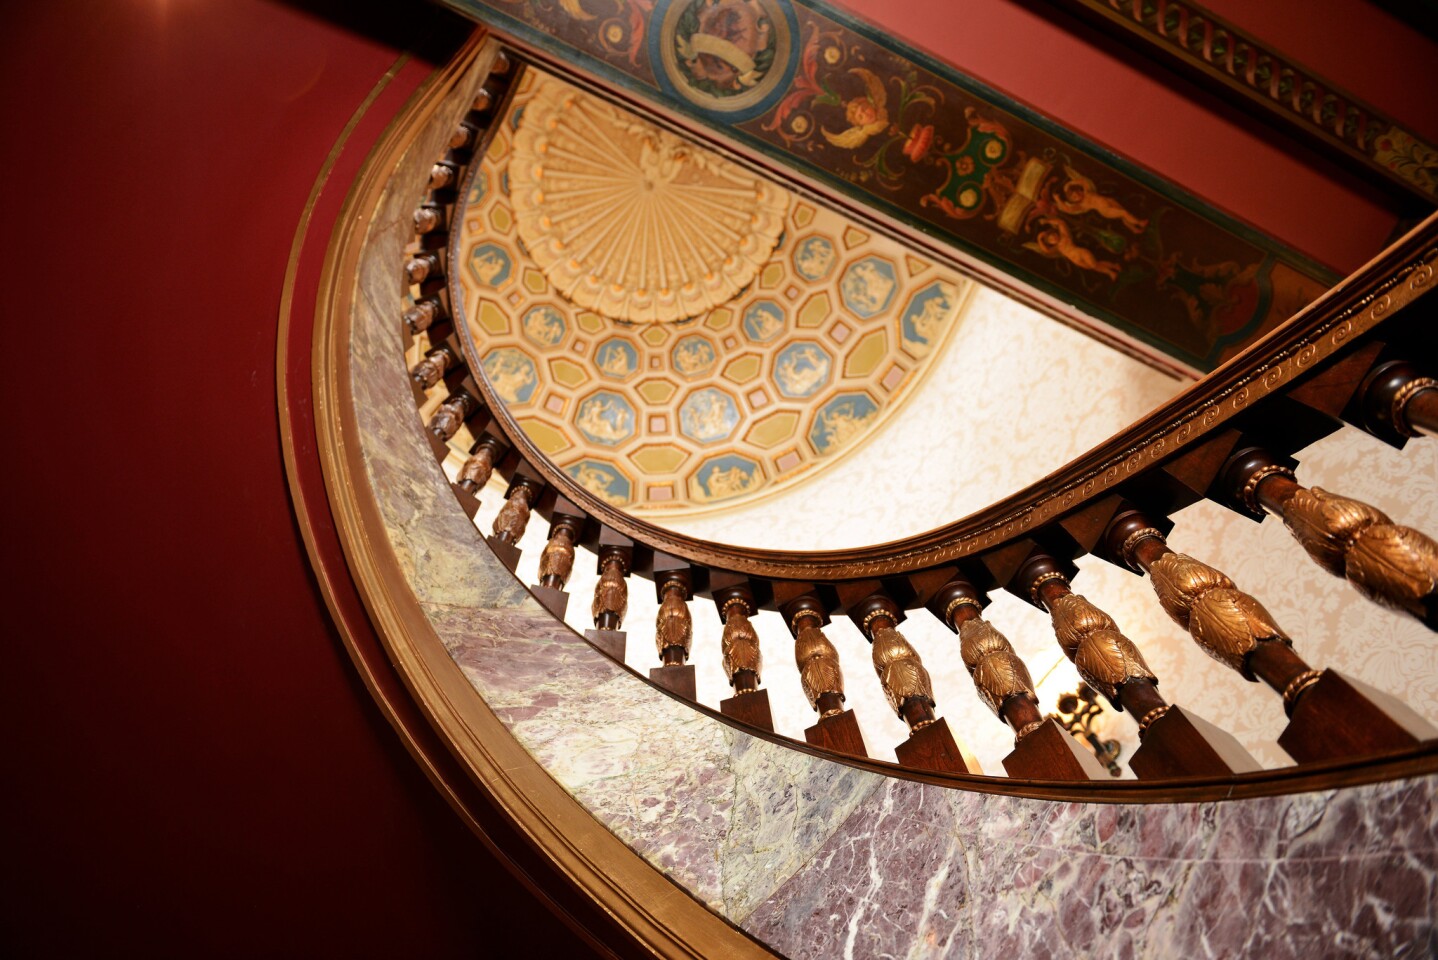 An ornate spiral staircase is a centerpiece of the lobby at the Broadmoor. The staircase was refurbished to commemorate the resort’s 100th anniversary this year.